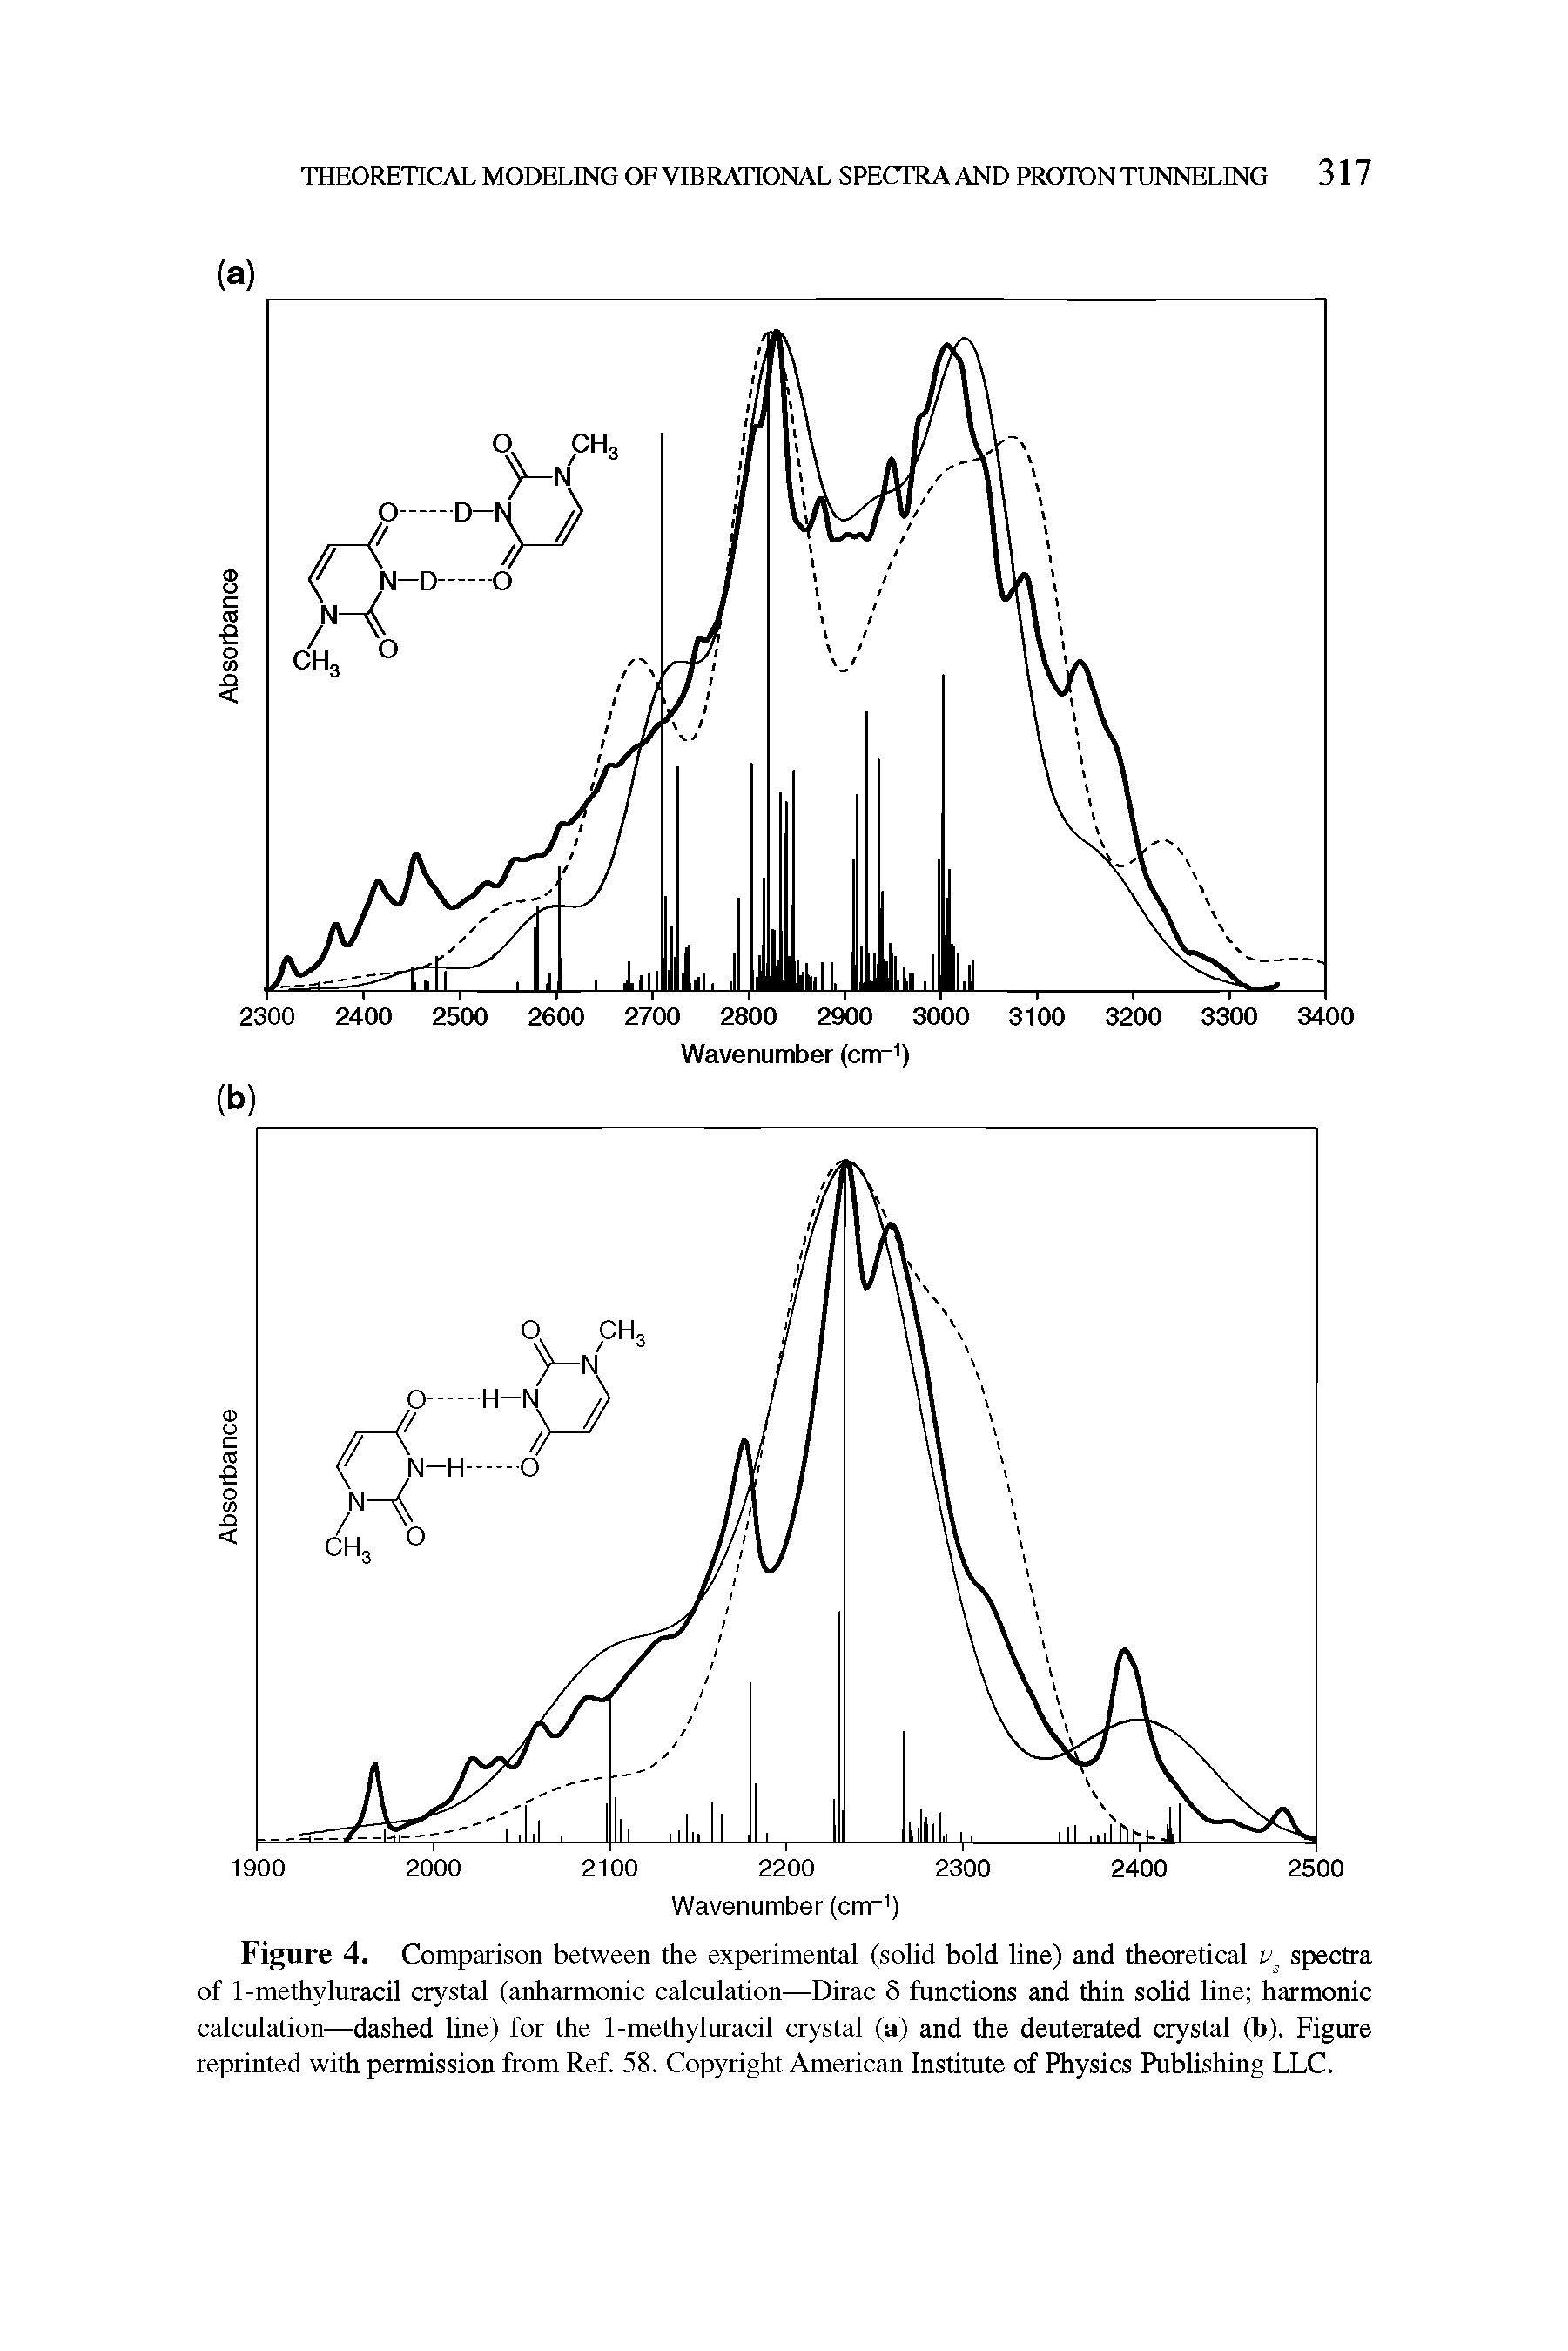 Figure 4. Comparison between the experimental (solid bold line) and theoretical v spectra of 1-methyluracil crystal (anharmonic calculation—Dirac 5 functions and thin solid line harmonic calculation—dashed line) for the 1-methyluracil crystal (a) and the deuterated crystal (b). Figure reprinted with permission from Ref. 58. Copyright American Institute of Physics Publishing LLC.